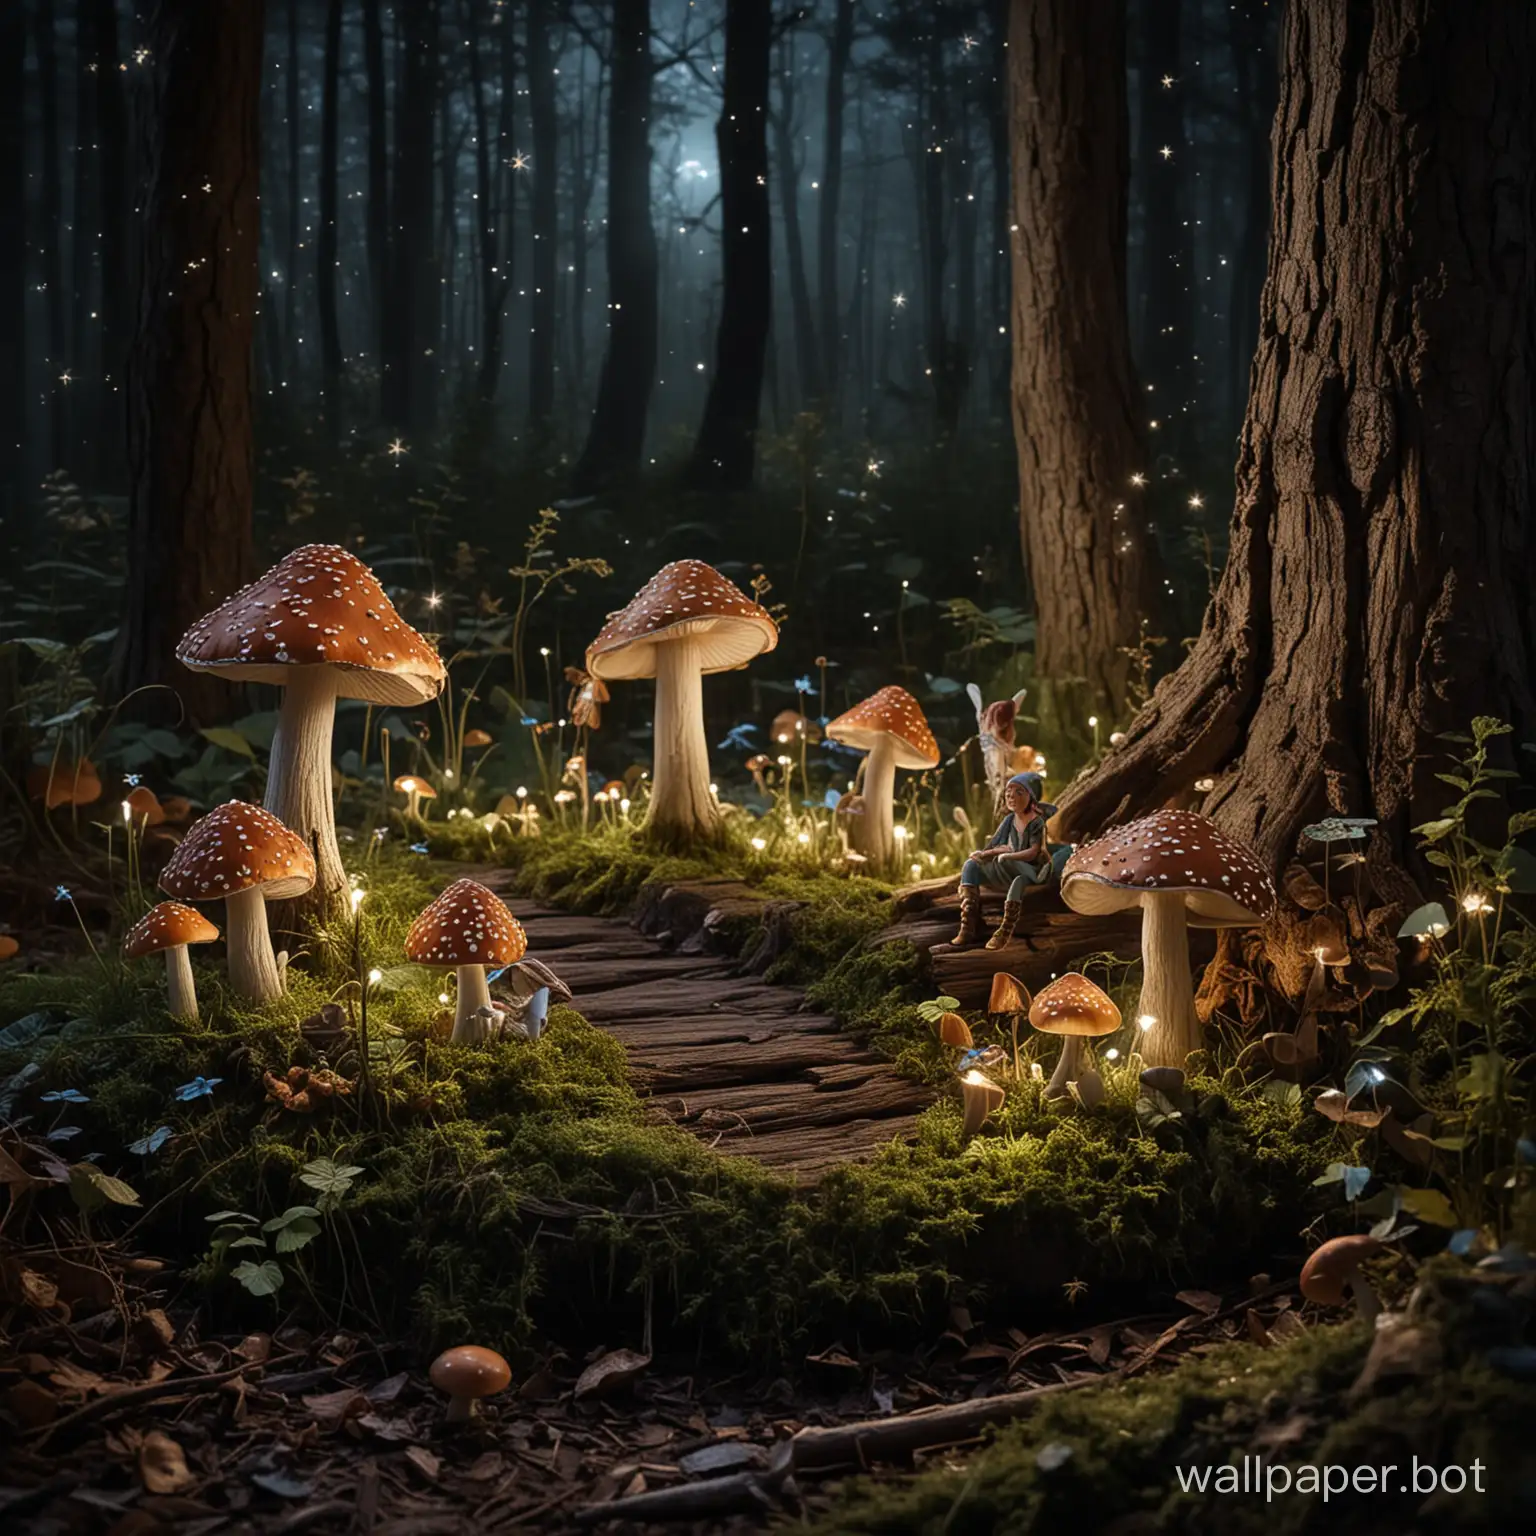 fairy wood with mushrooms and elves, night ambience, little stars